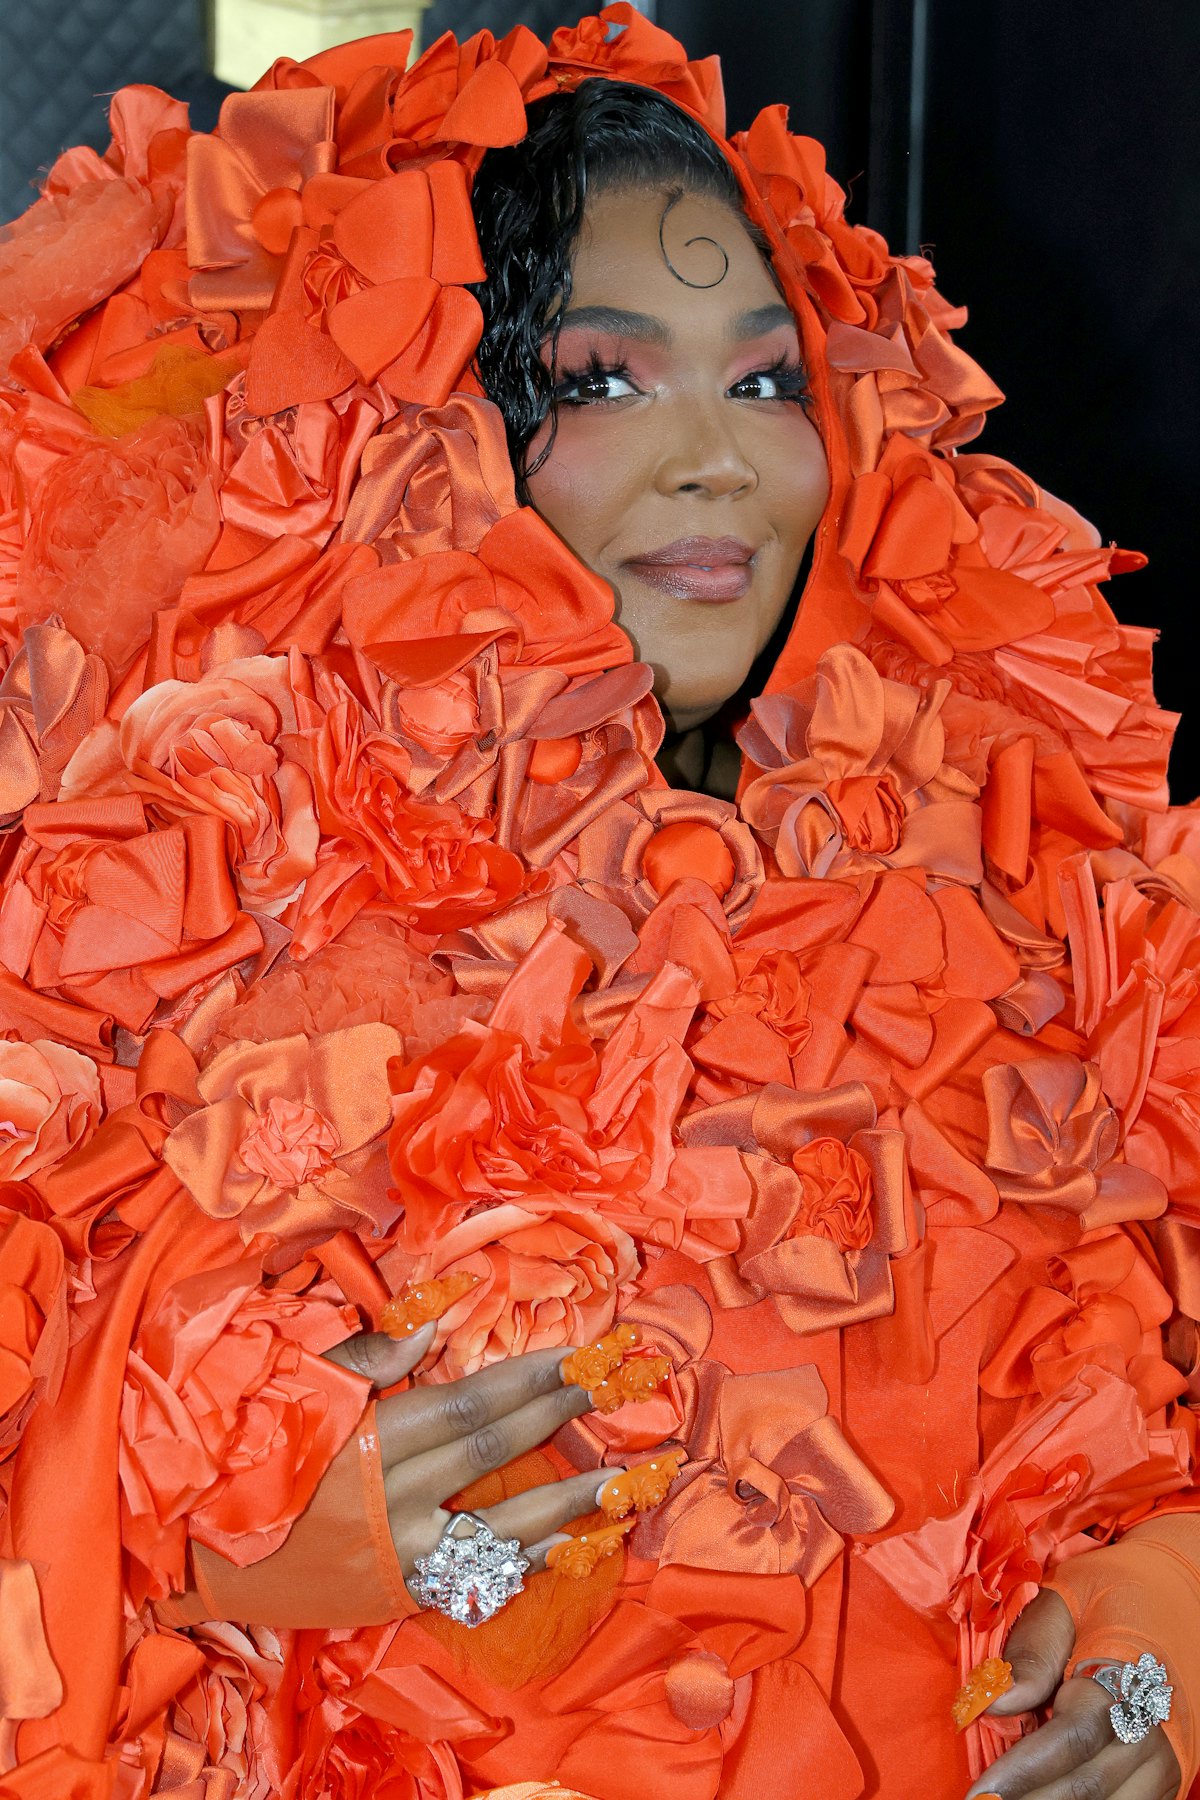 Lizzo's orange 3D nails were one of the best nail art moments at the Grammys in 2023.